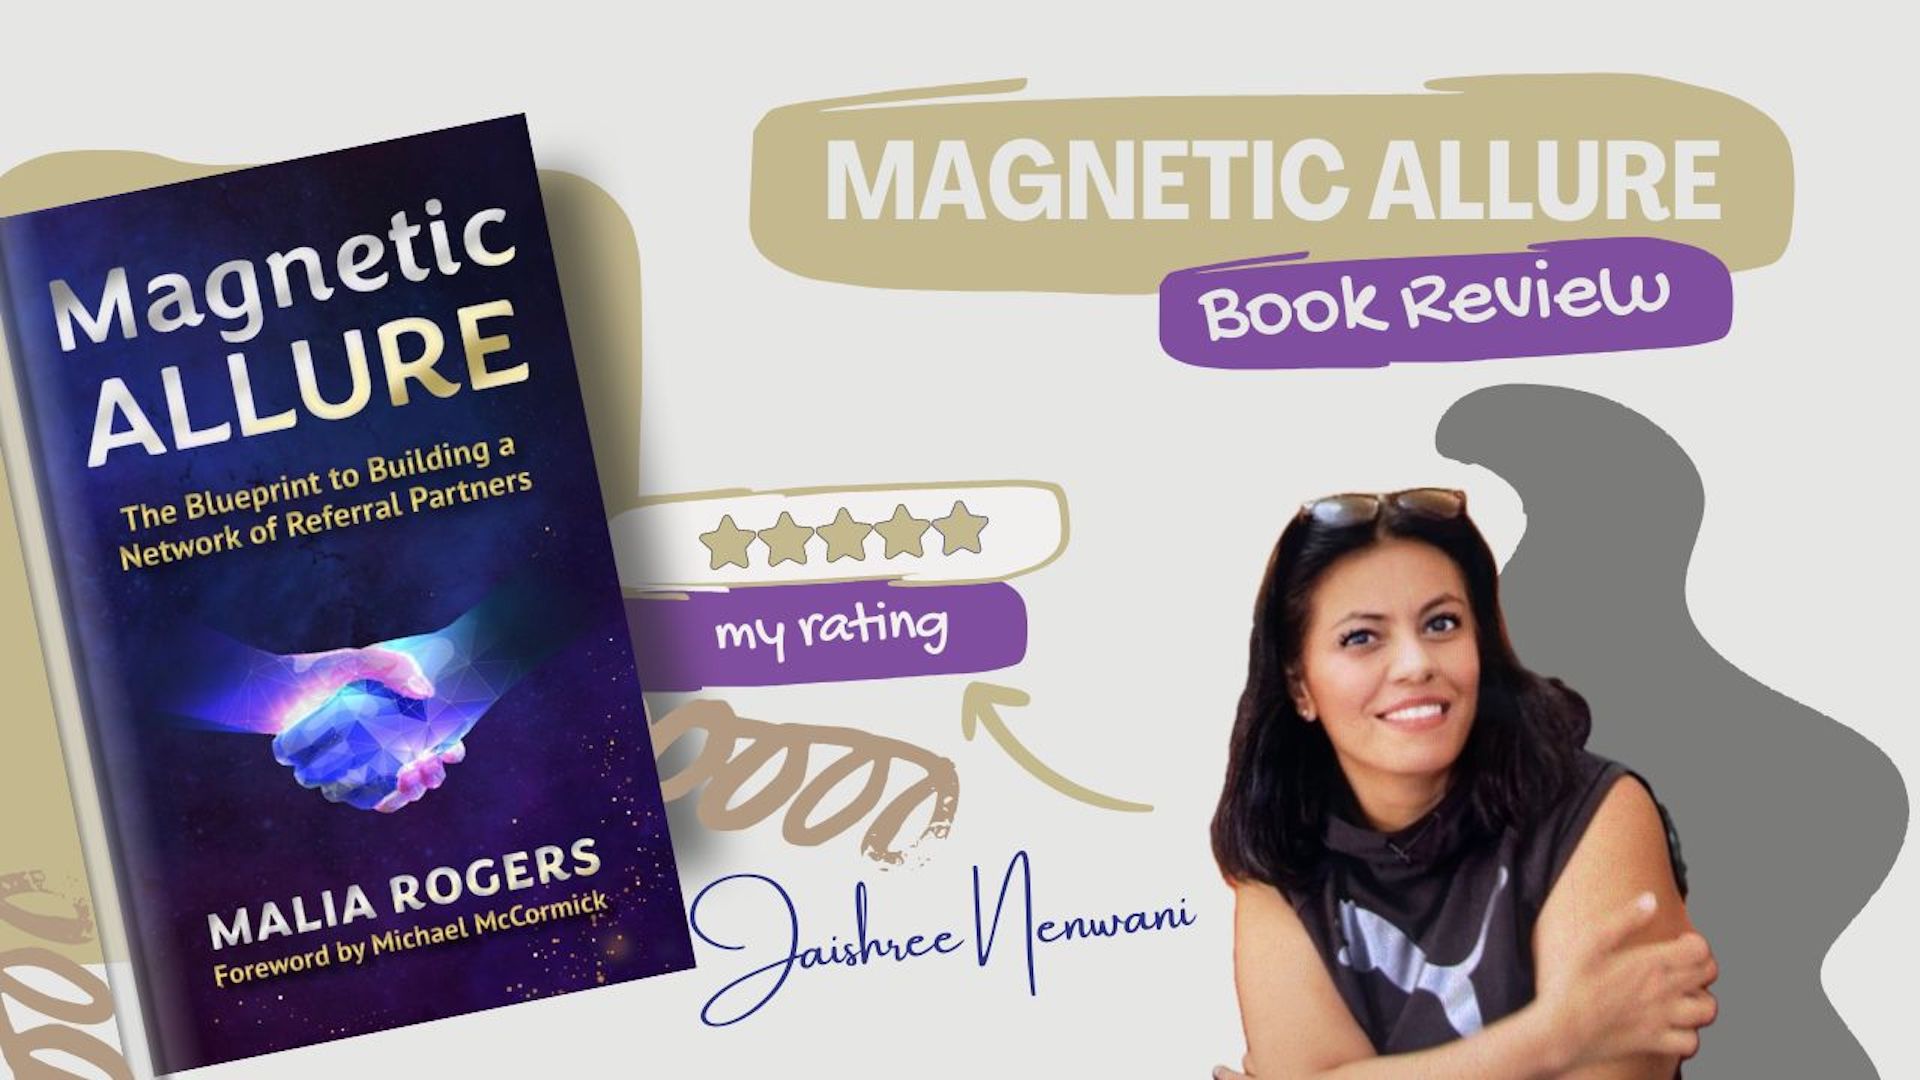 Magnetic Allure by Malia Rogers